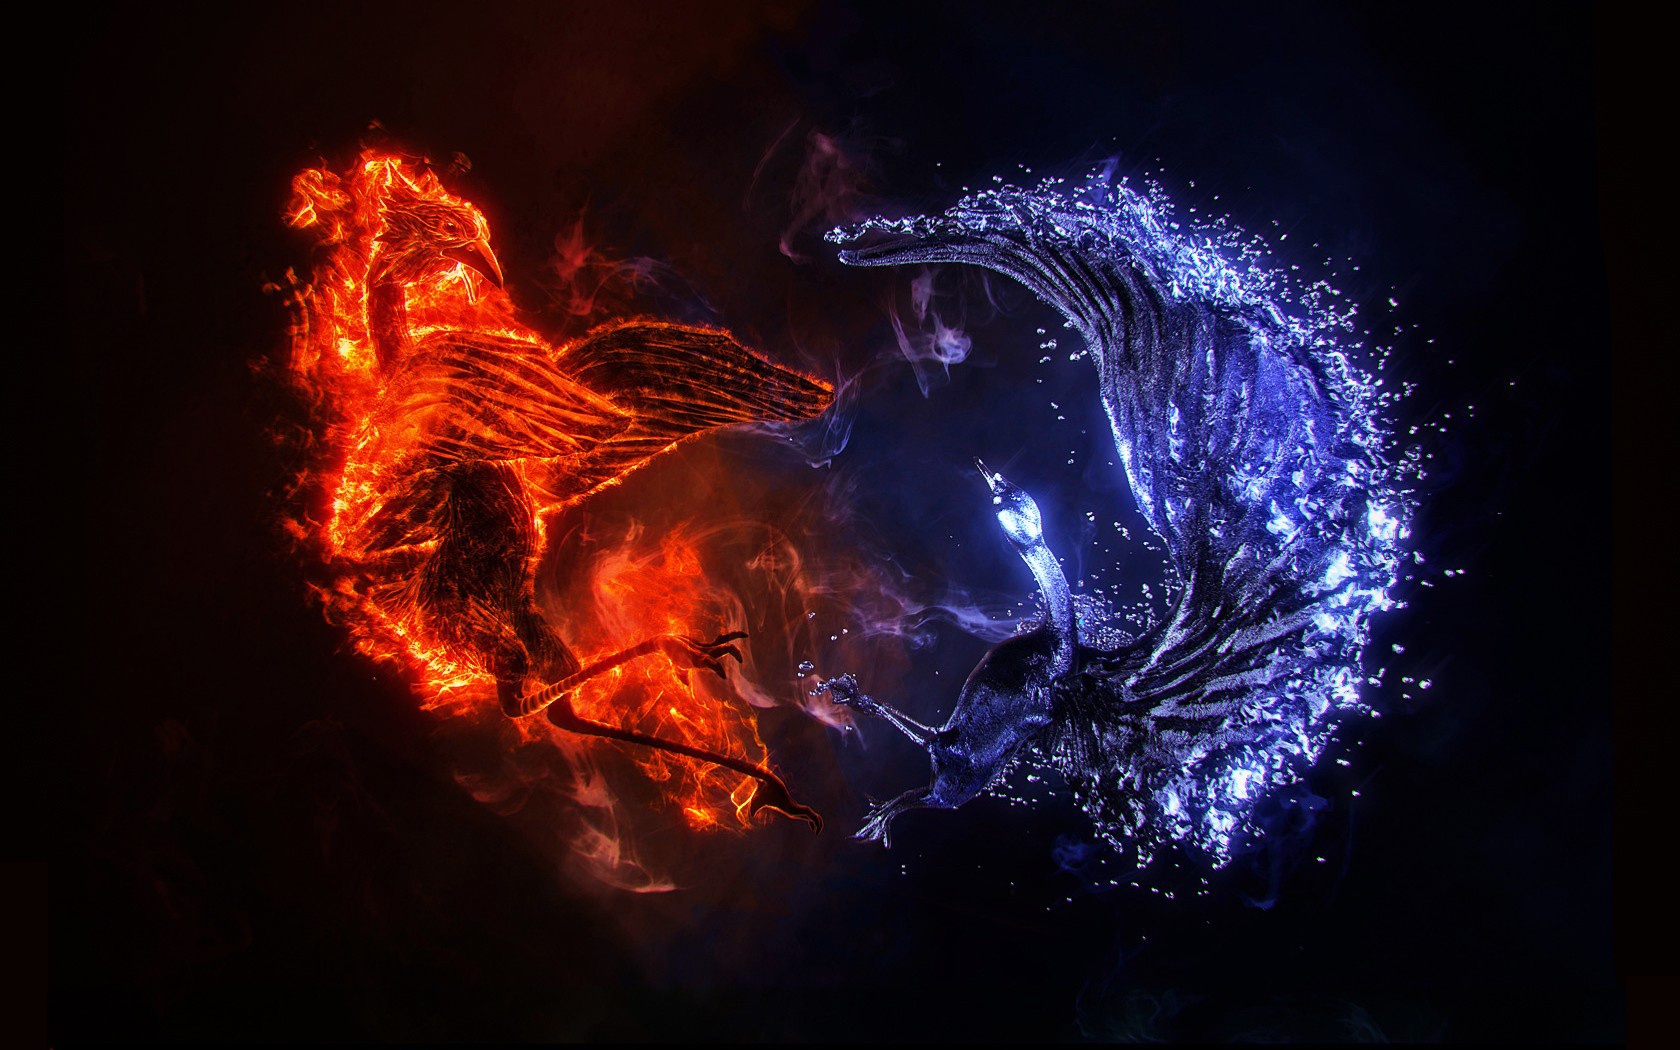 Free download fire and ice wolf wallpaper [1680x1050] for your Desktop, Mobile & Tablet. Explore Fire and Ice Wolf Wallpaper. Fire Dragon Wallpaper, Fire Dept Wallpaper, Ice Wallpaper